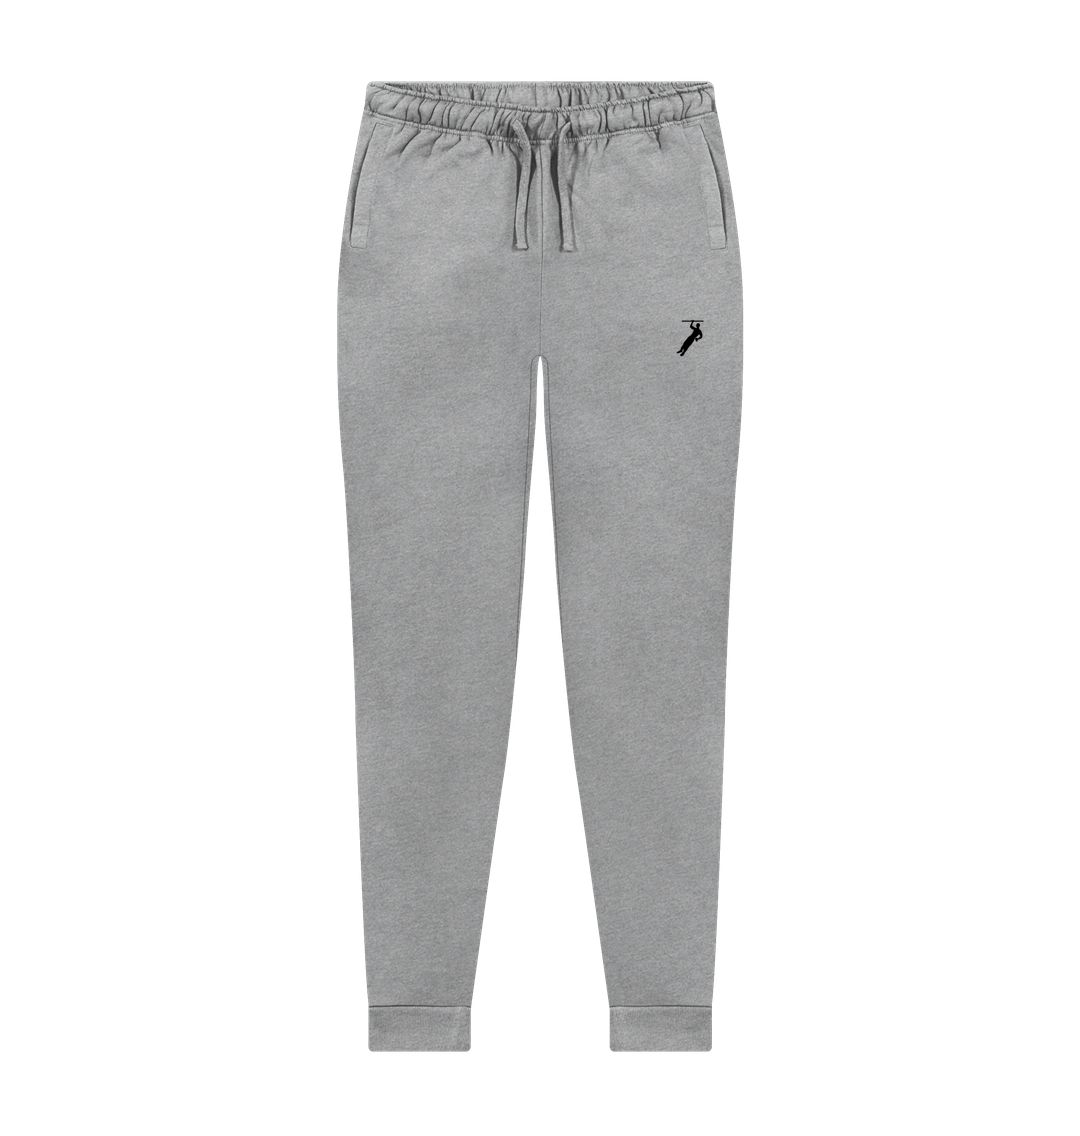 Athletic Grey Grey Joggers with white logo